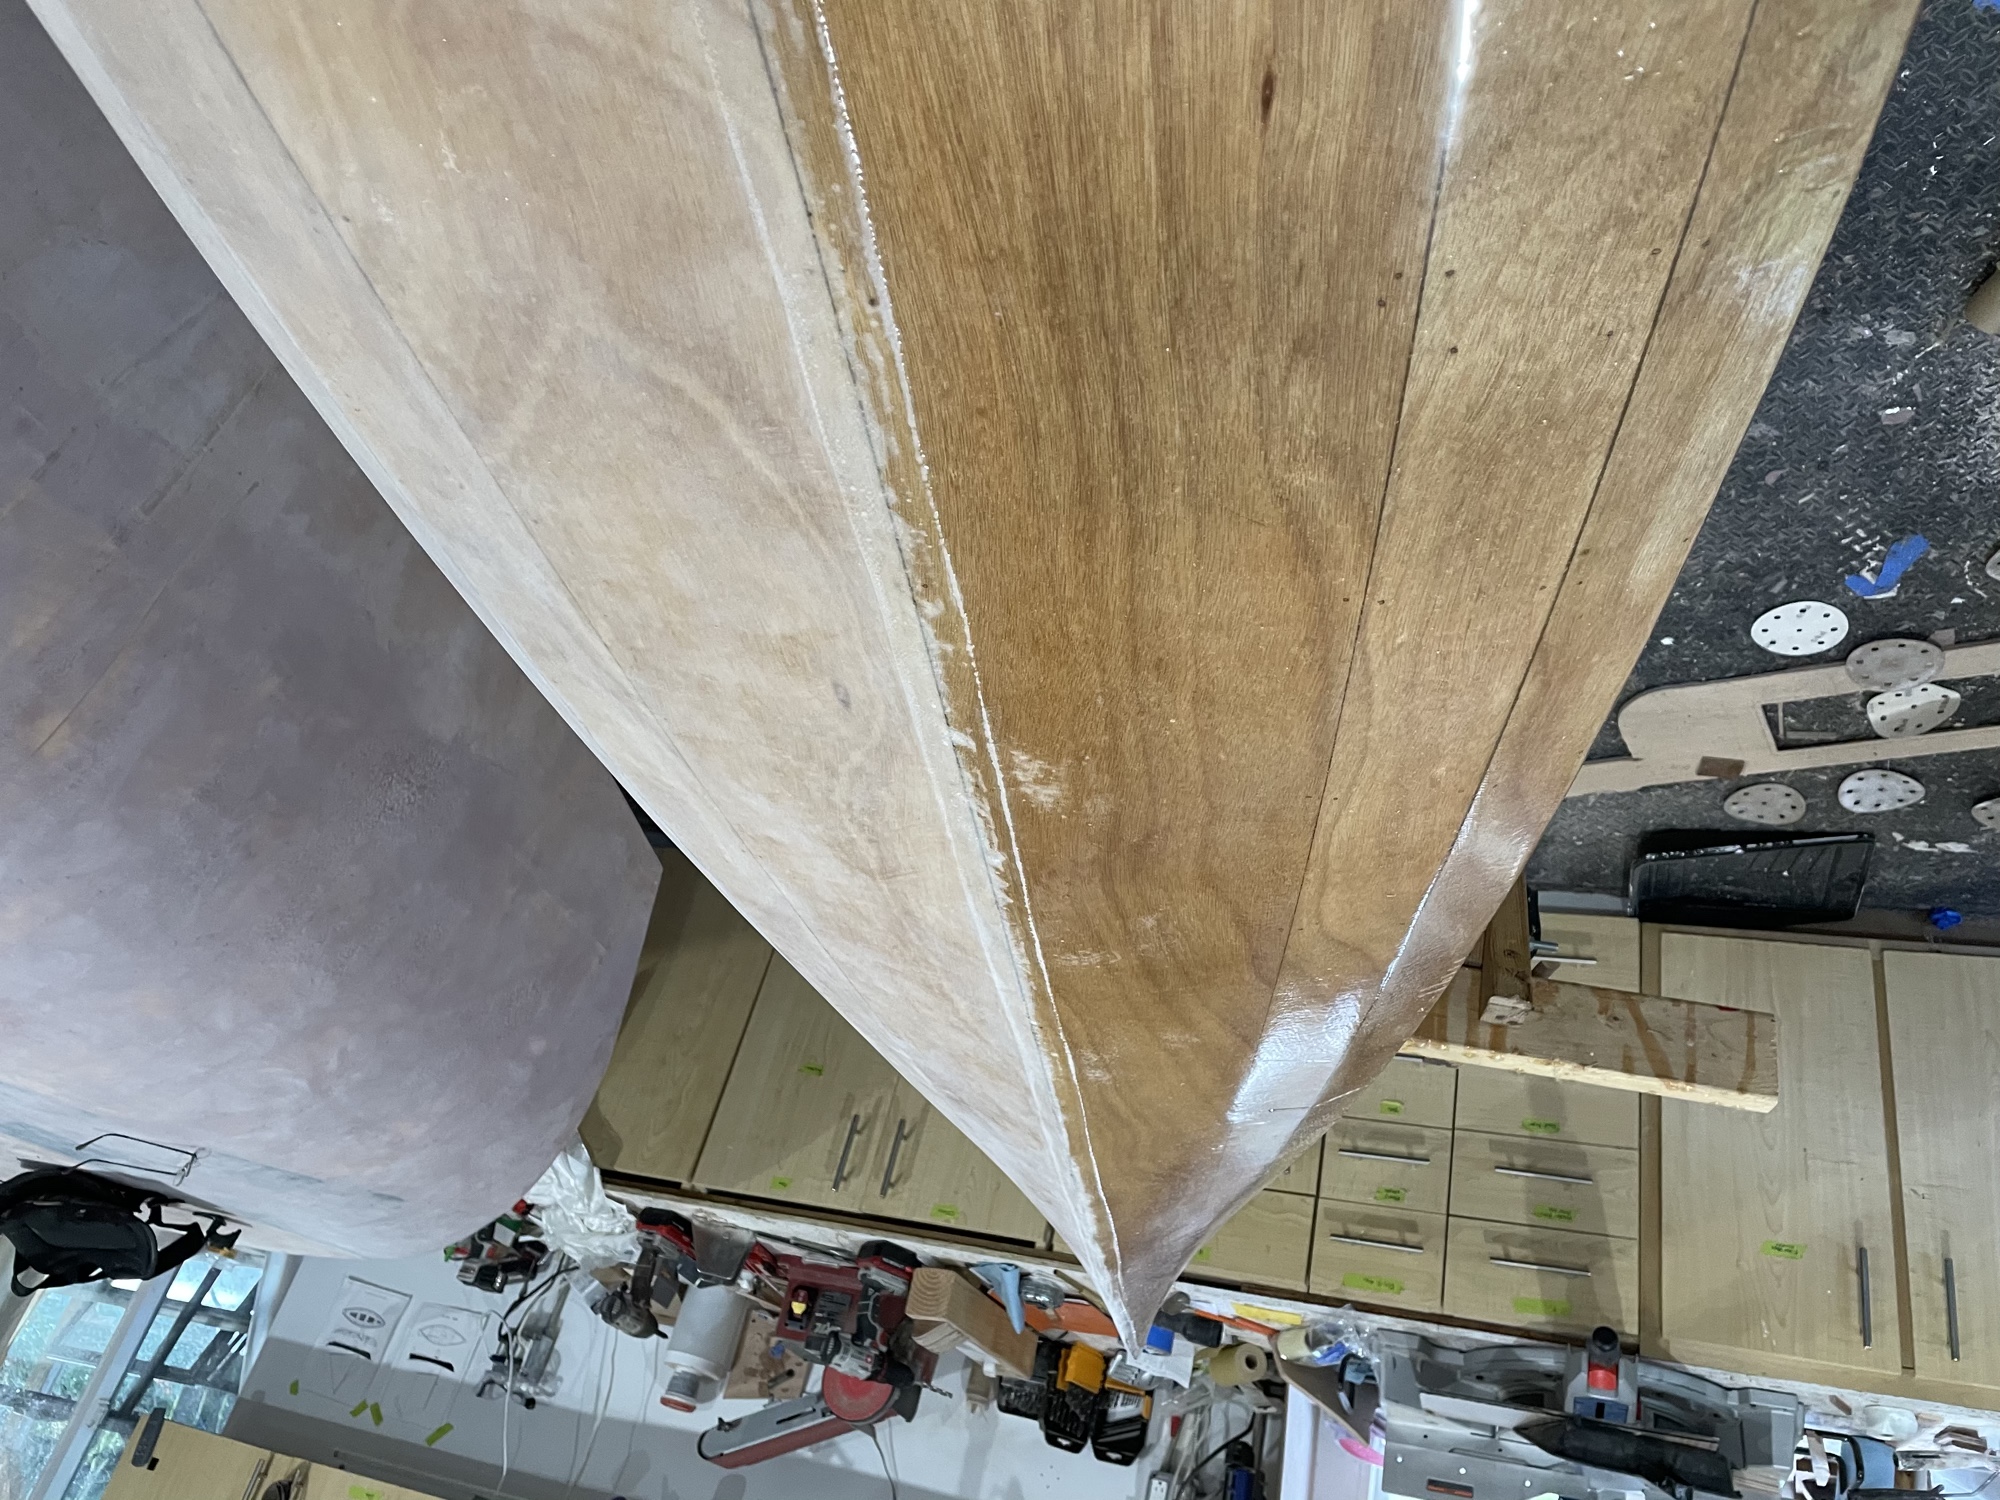  1/3/21 - The deck and half the hull is finish sanded. 